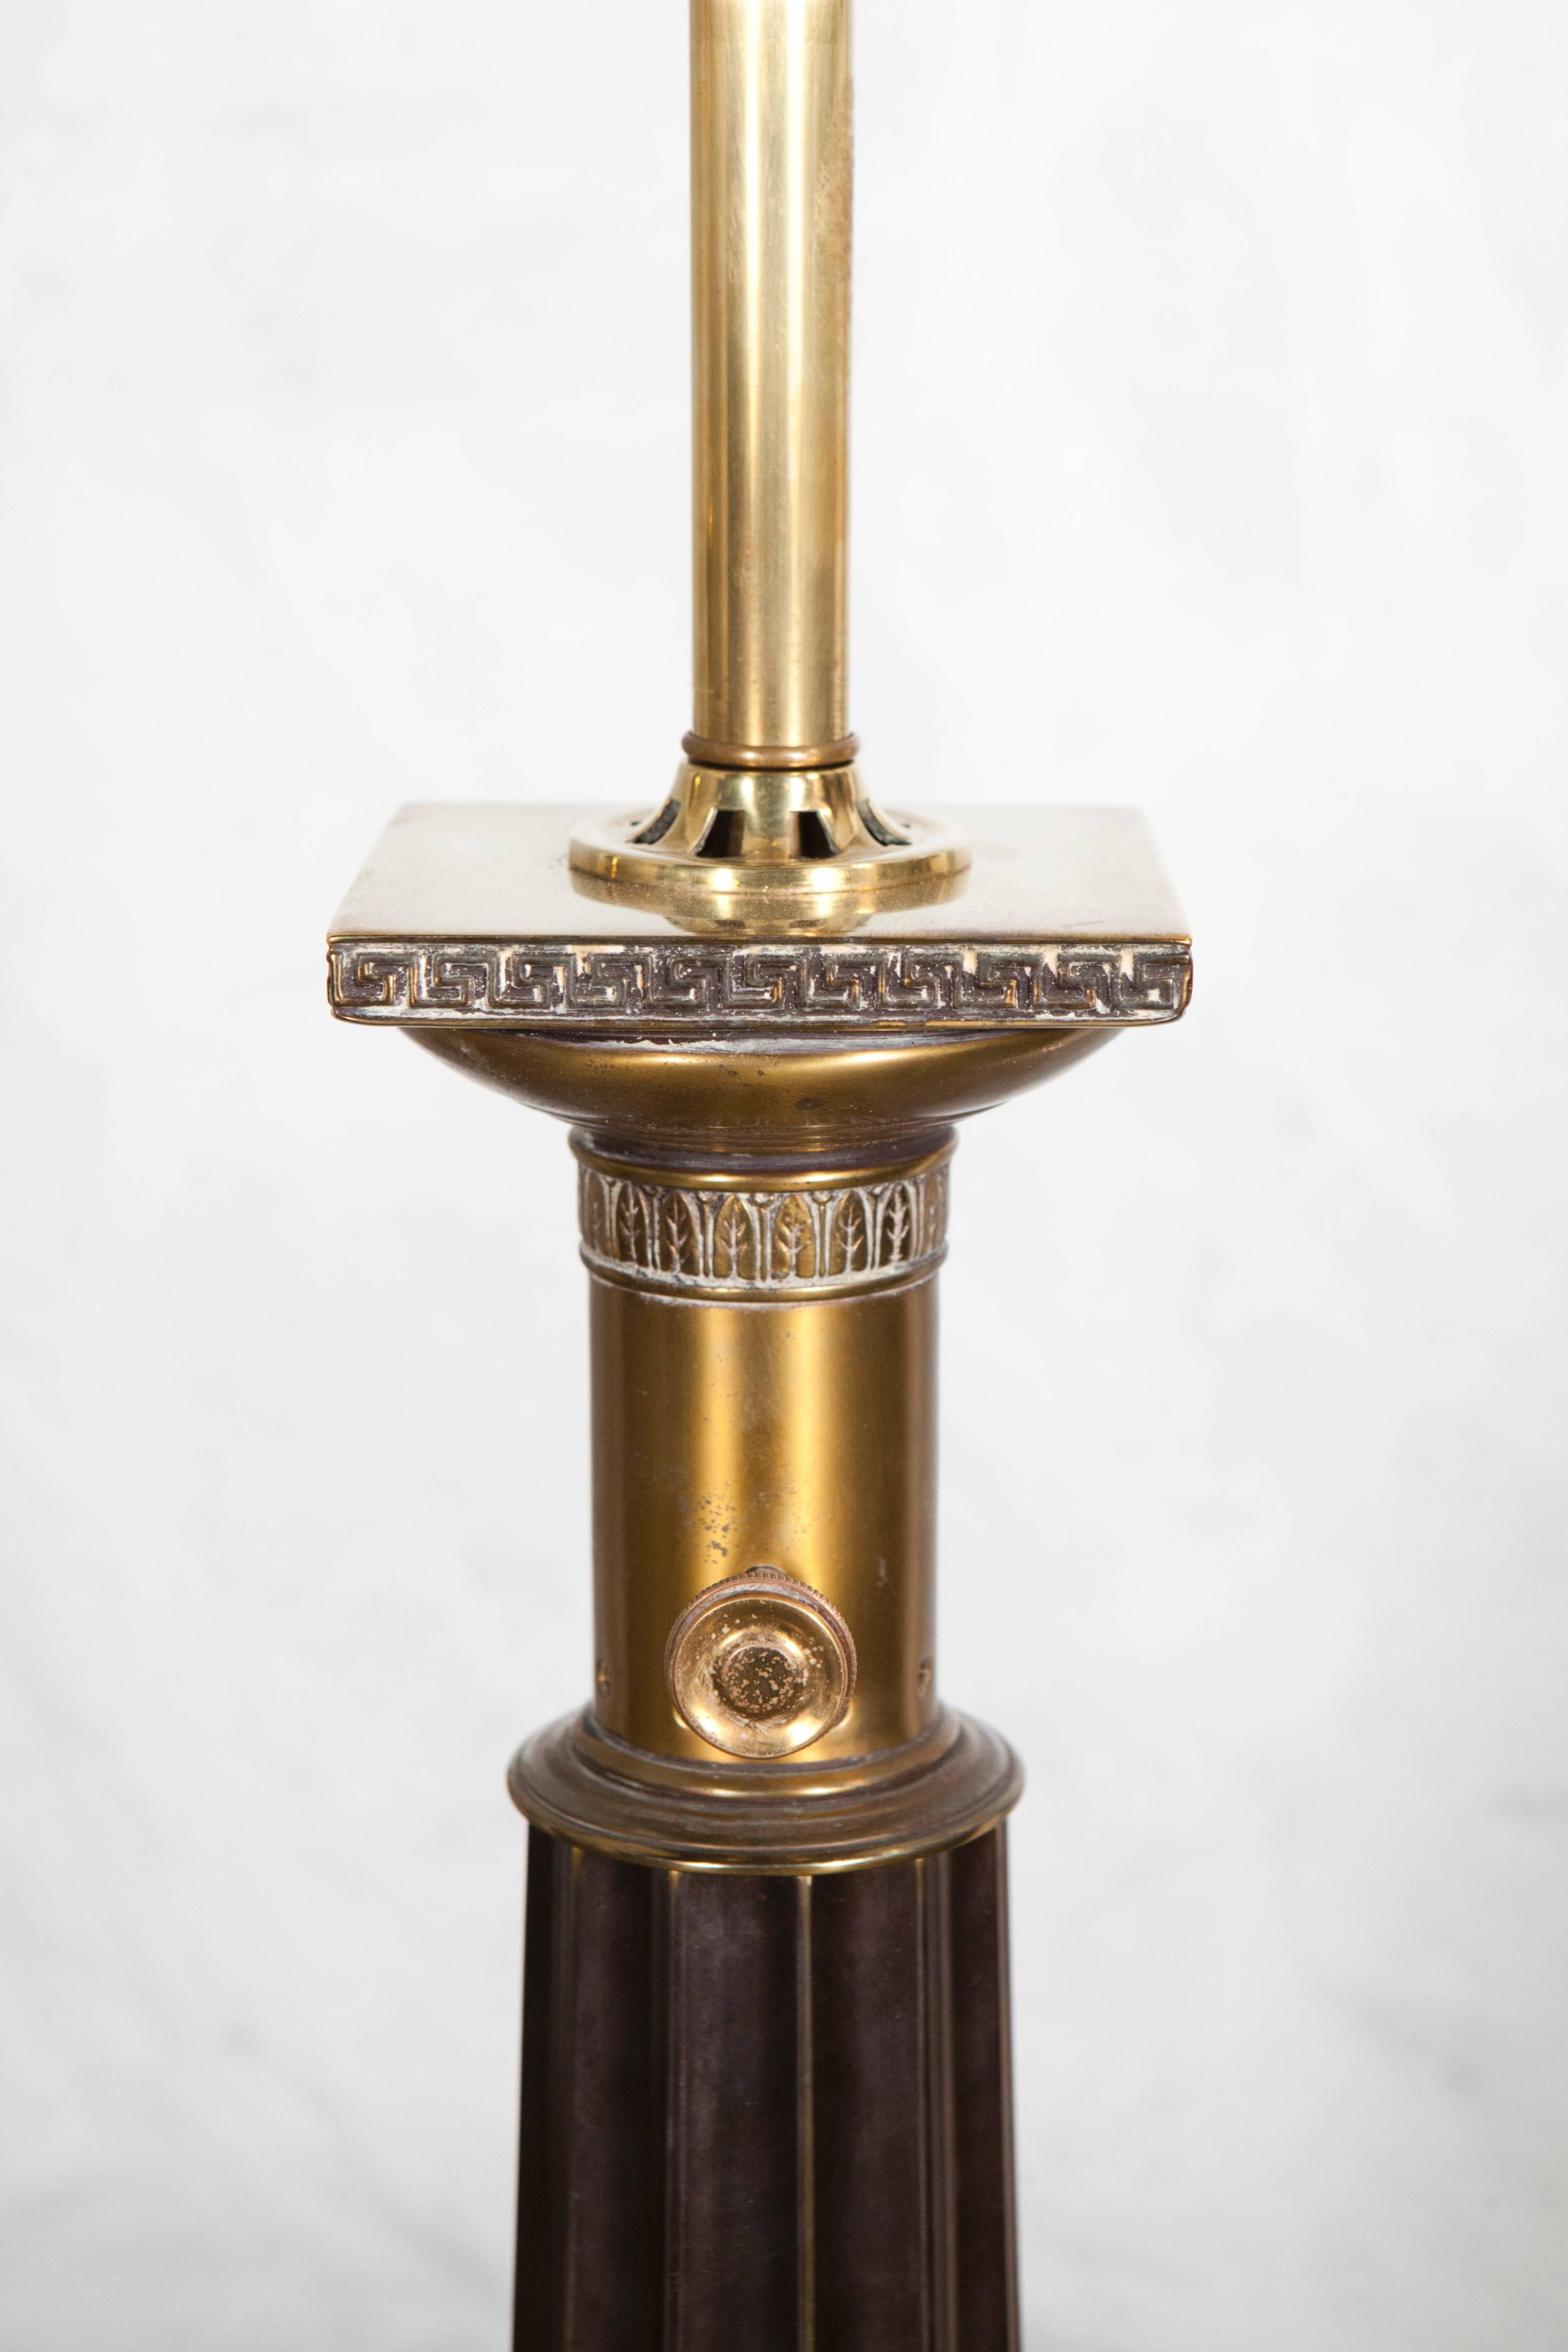 These handsome brass column lamps have leaf and Greek key patterns details and a distinguished Mid-Century Modern aesthetic. The lamps have been recently re-wired and are ready for installation and use.